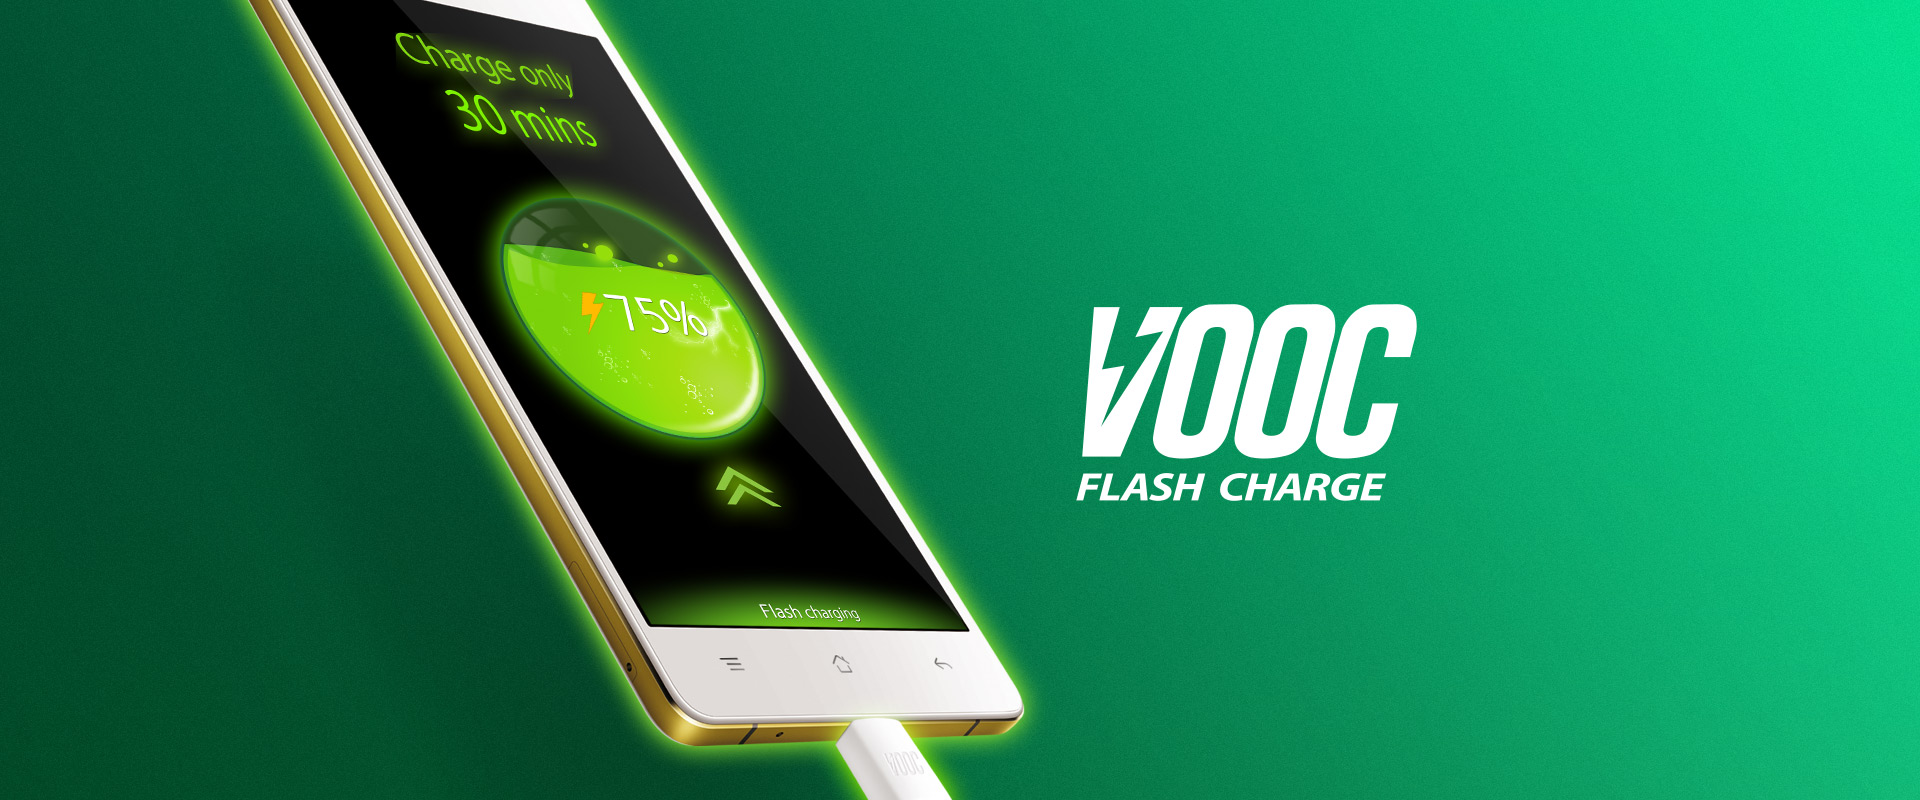 Oppo Vooc Charging Technology